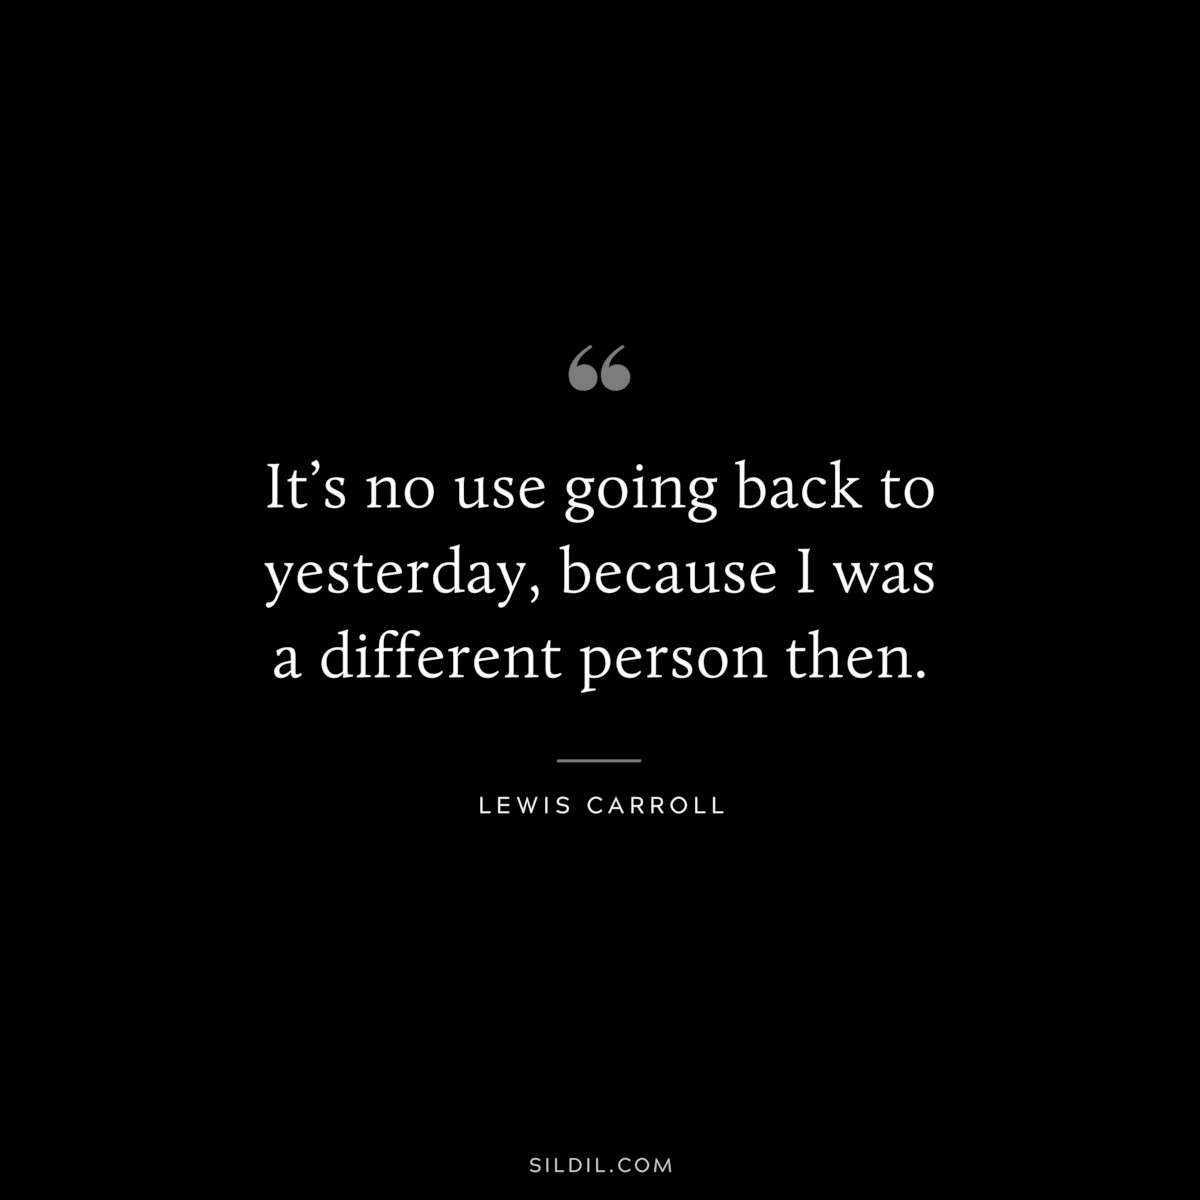 It’s no use going back to yesterday, because I was a different person then.